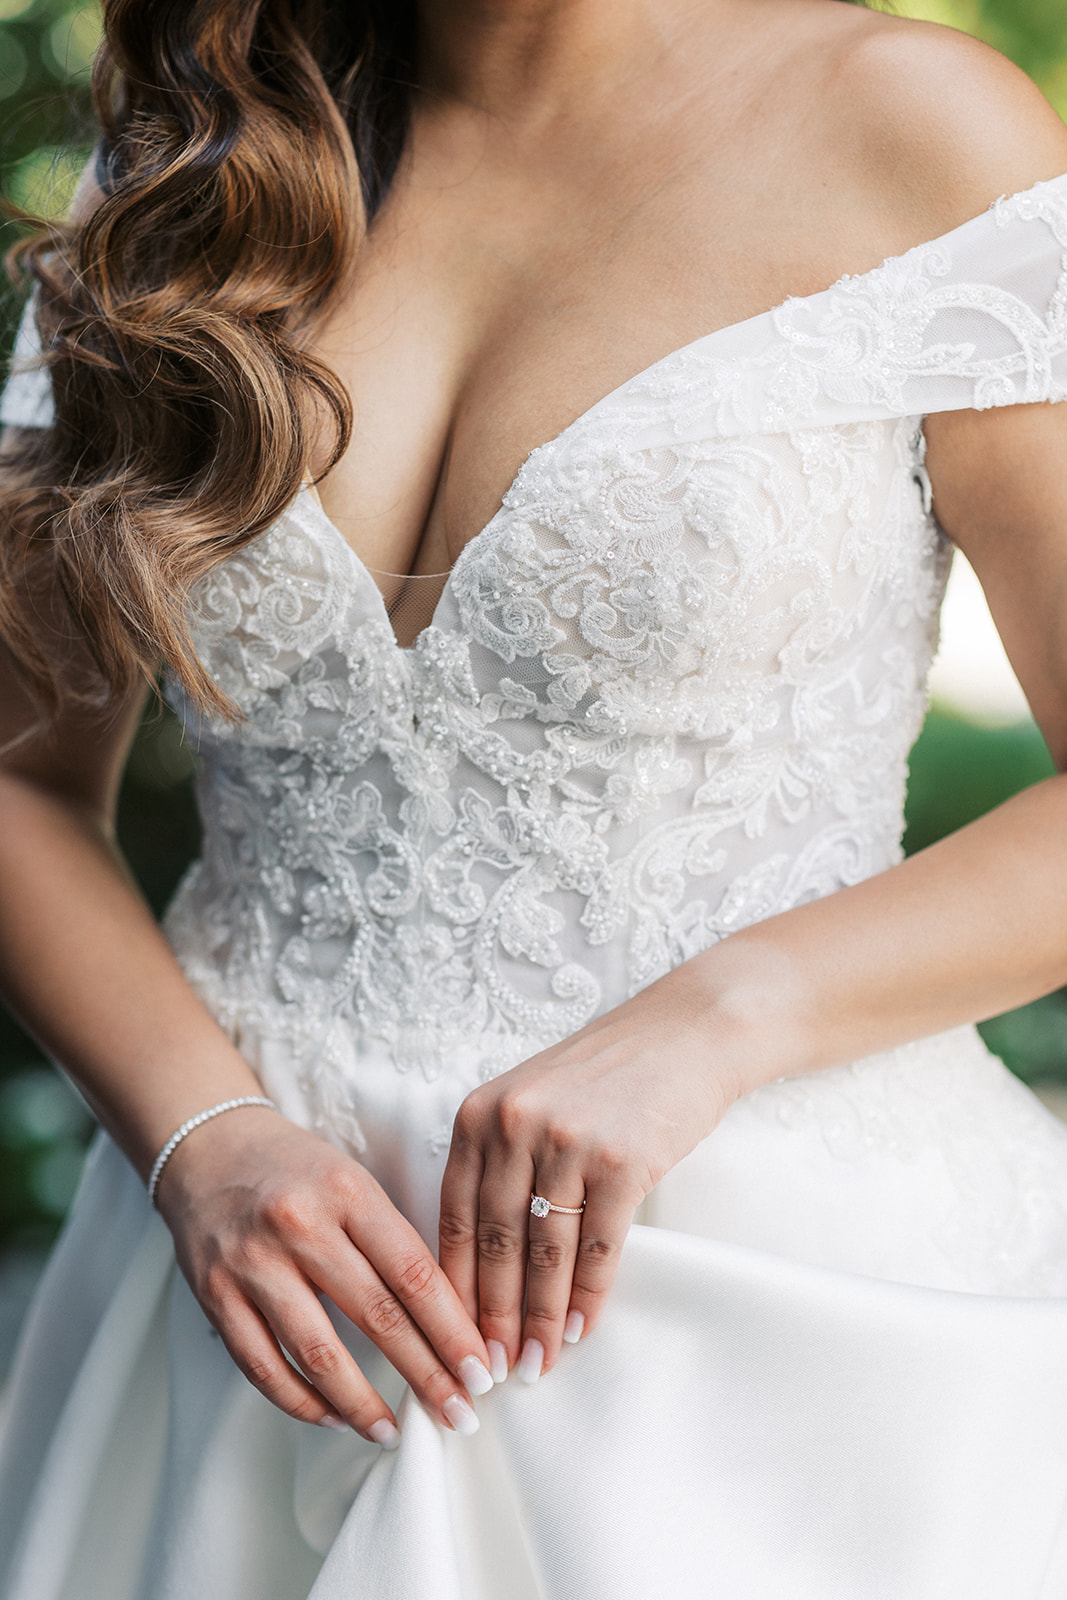 Details of a bride's lace dress as she holds her train at an Addison Park Wedding